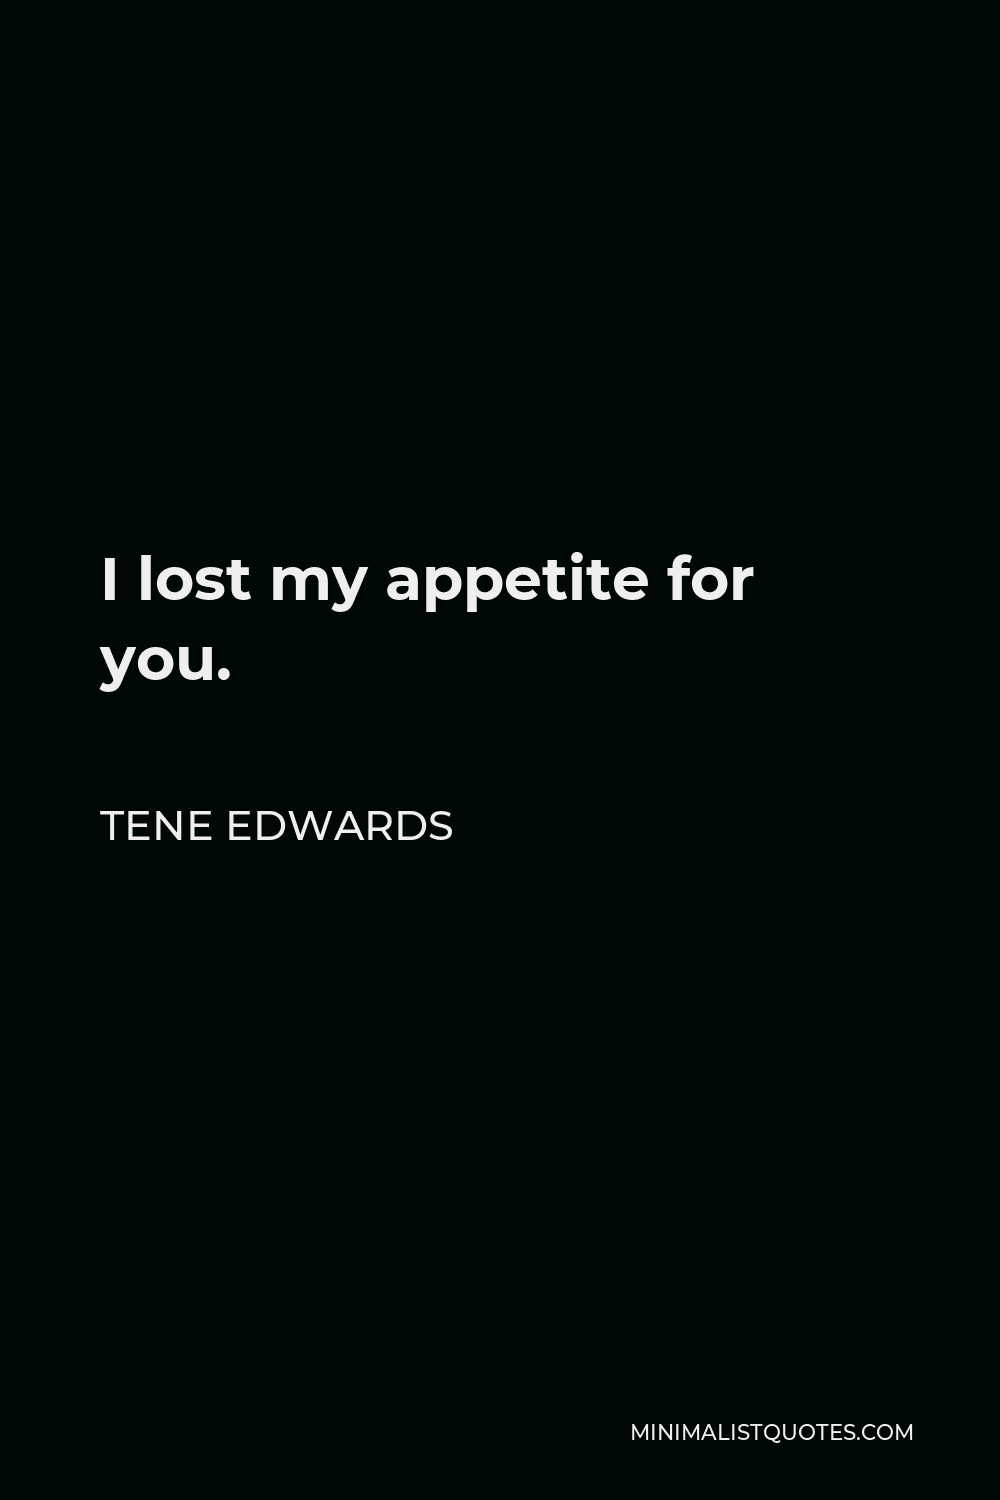 Tene Edwards Quote - I lost my appetite for you.